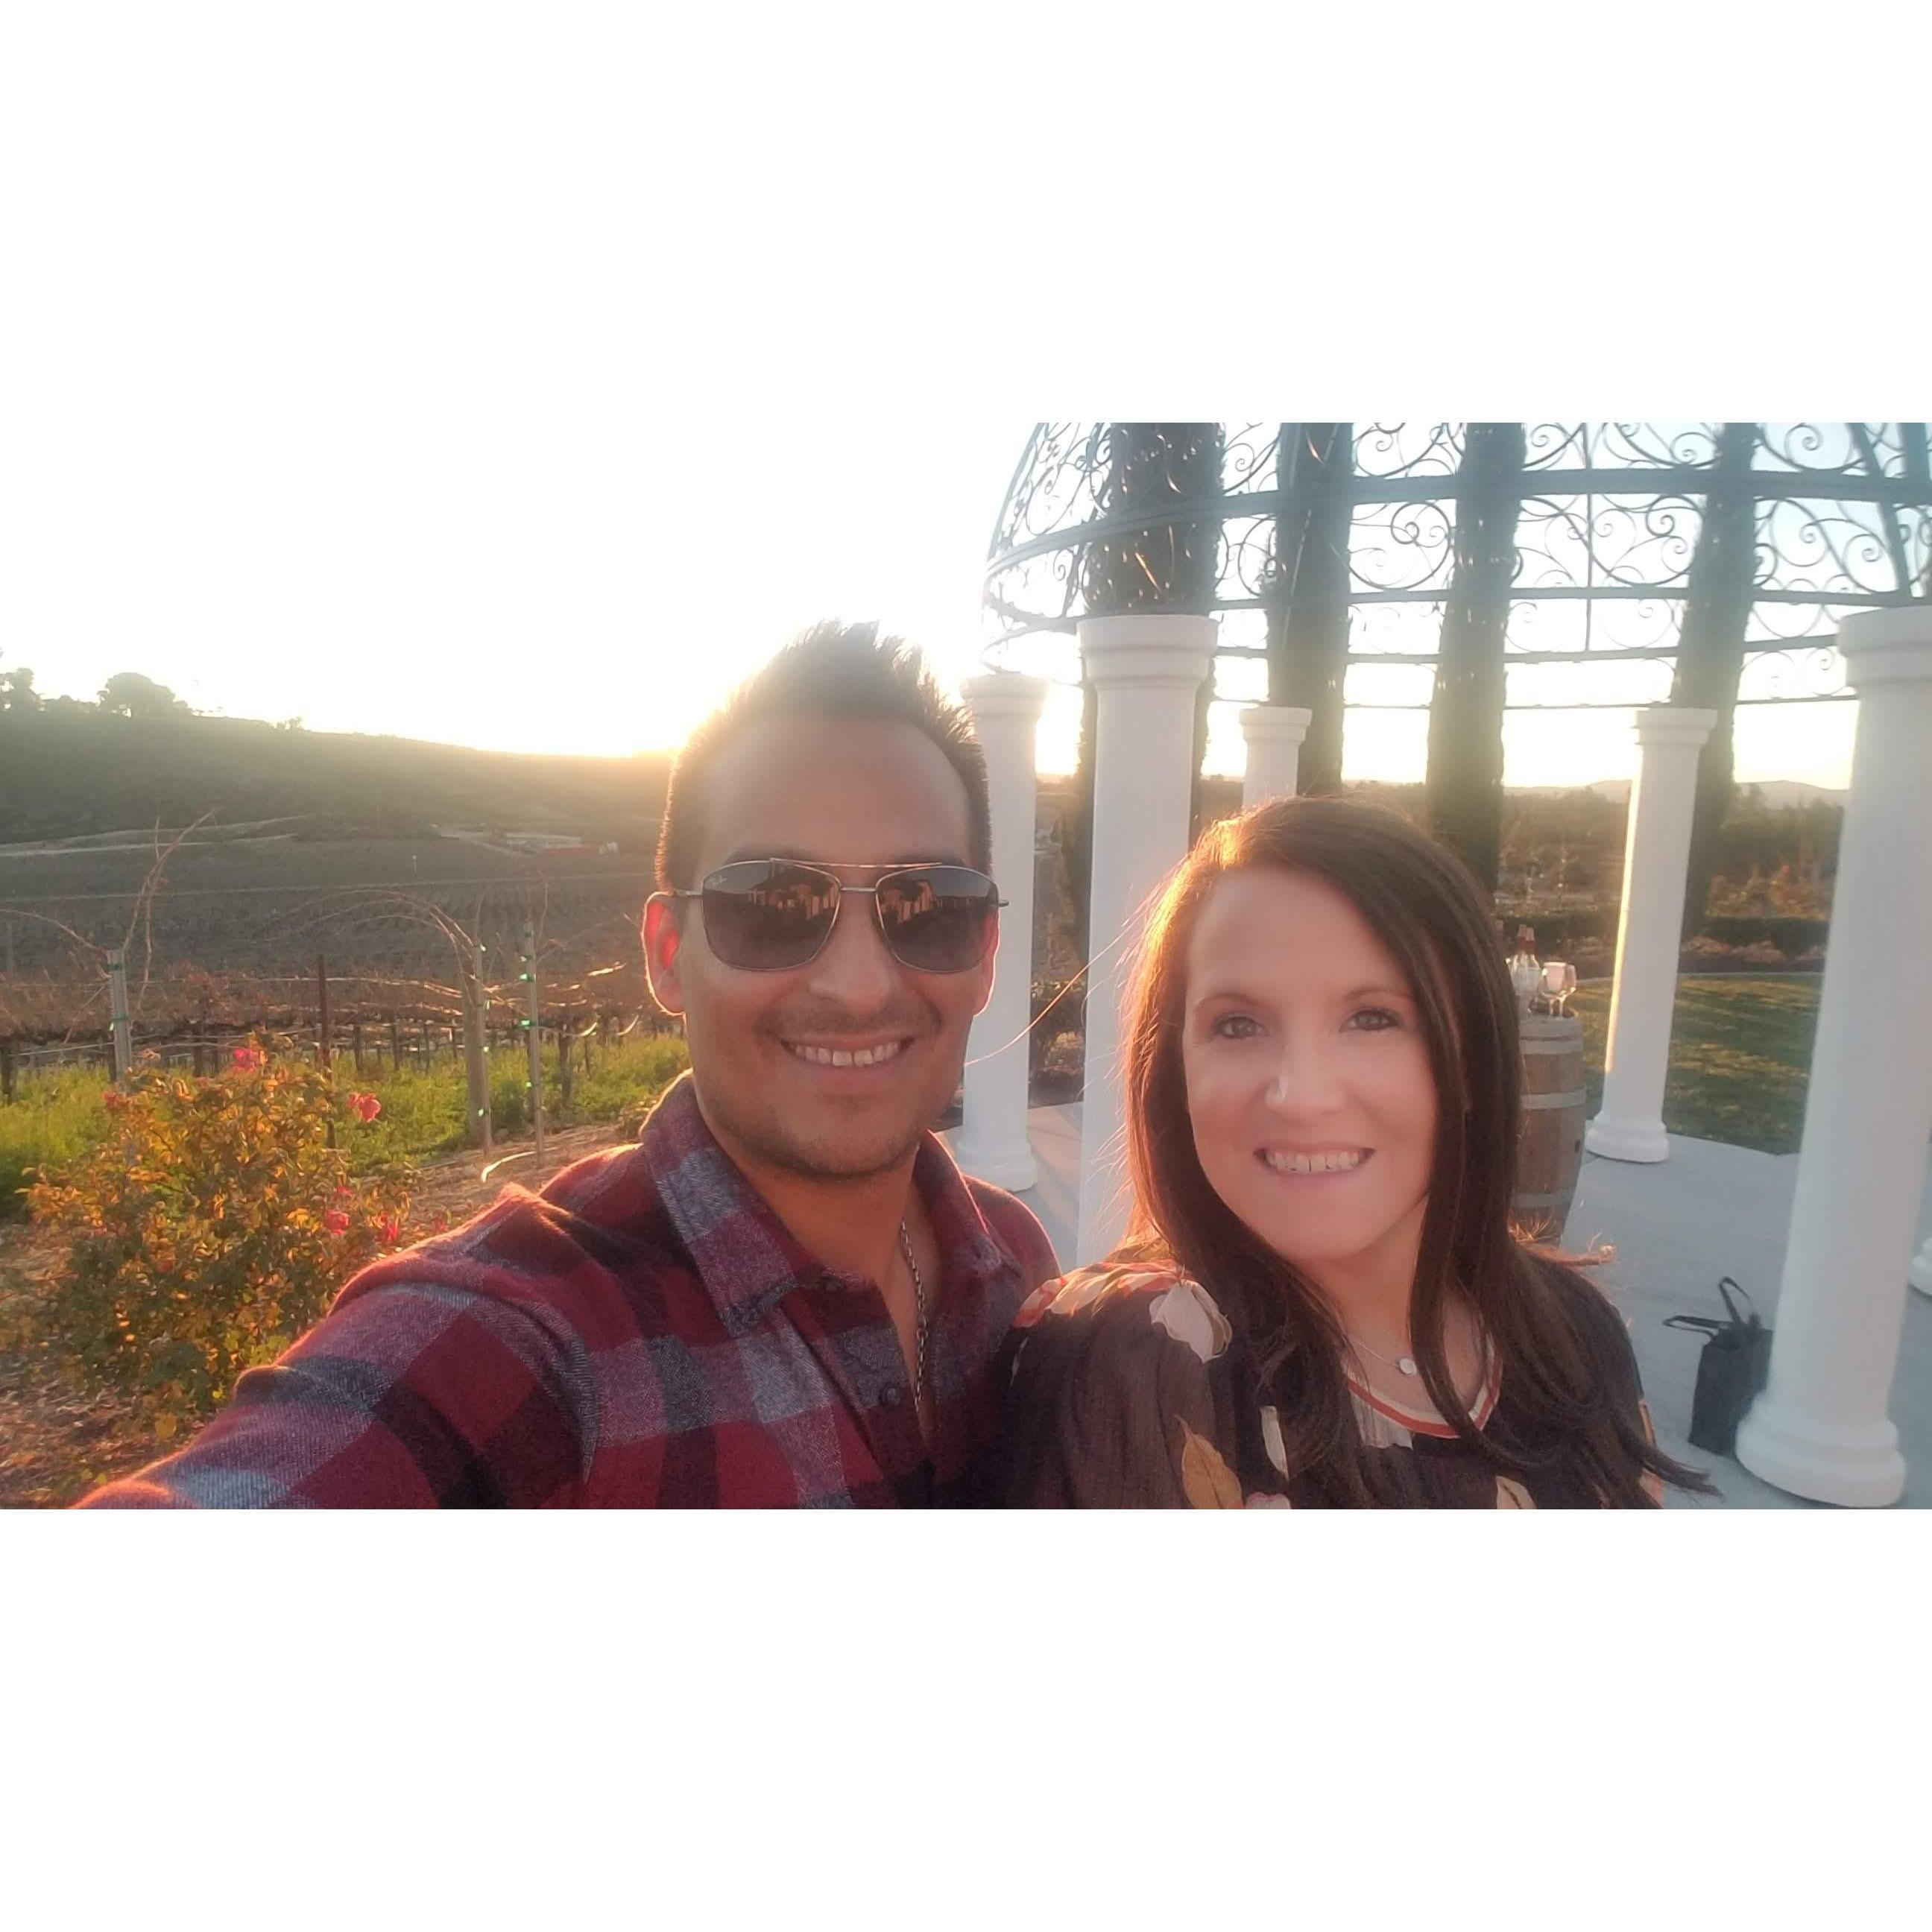 More wine tasting, this time in Temecula!